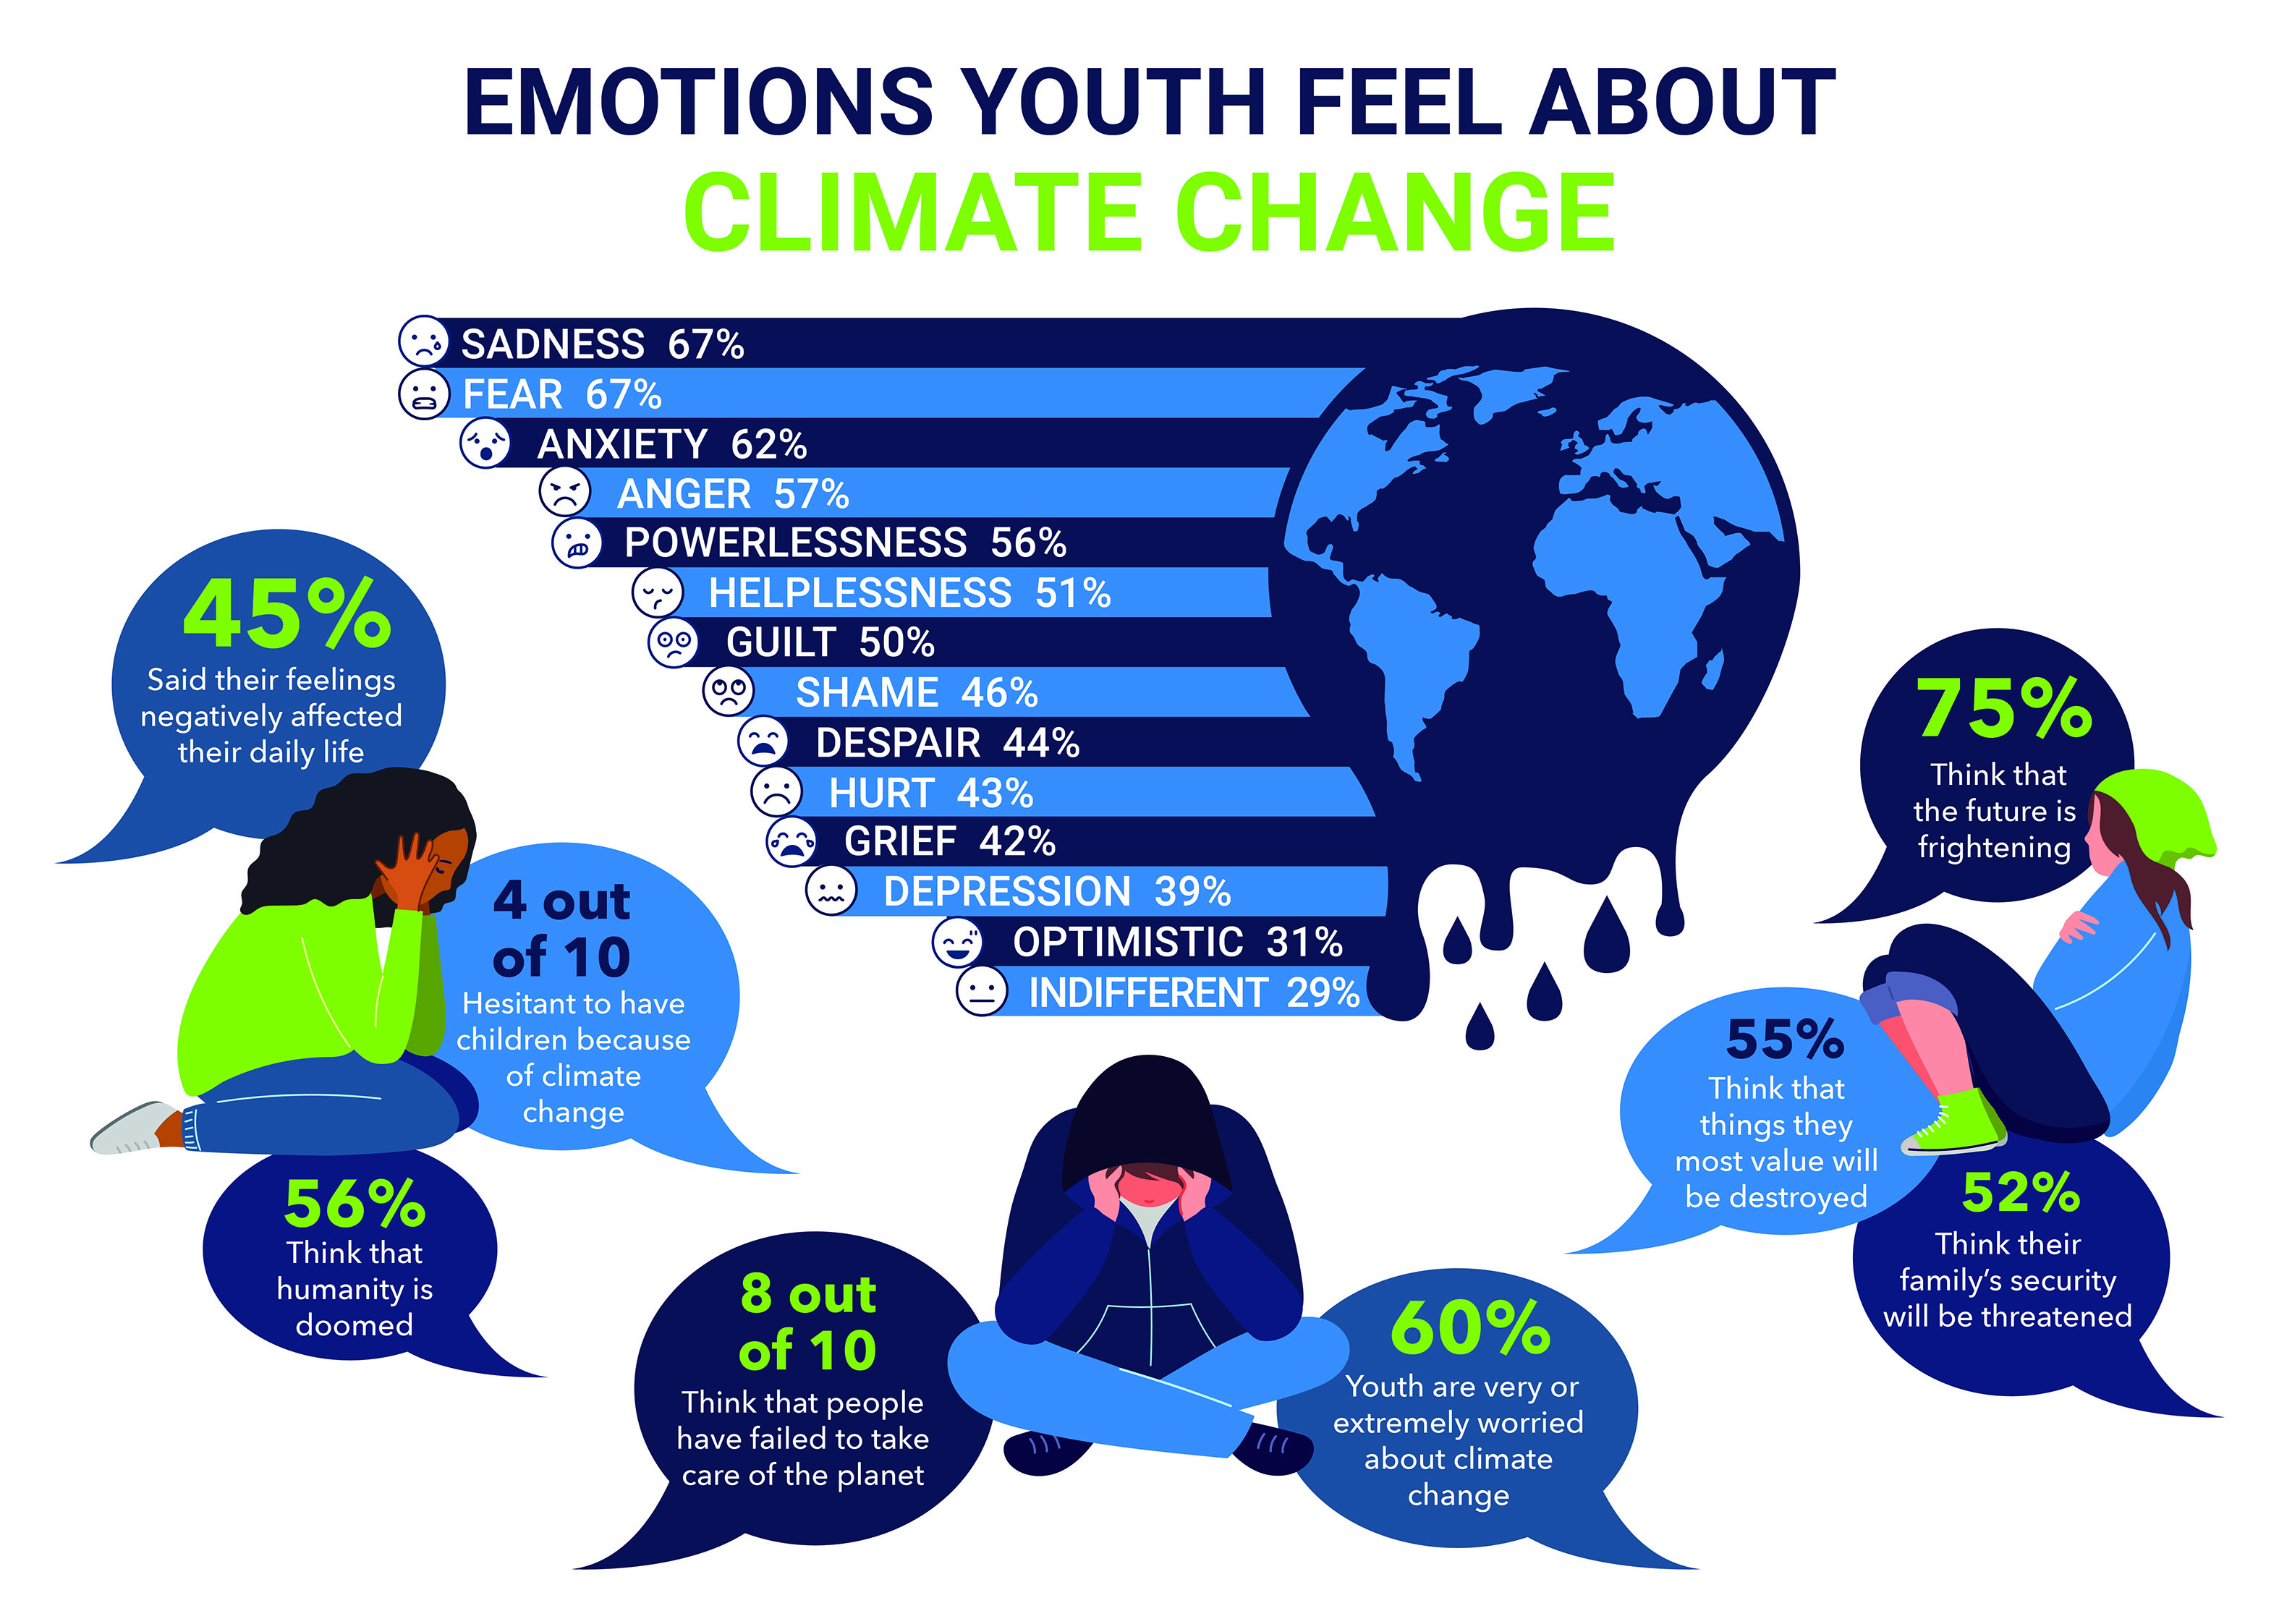 Figure 1: Percentage of youth that feel various emotions related to climate change. Survey data from an international study on youth climate change emotions (Hickman et al. 2021). 